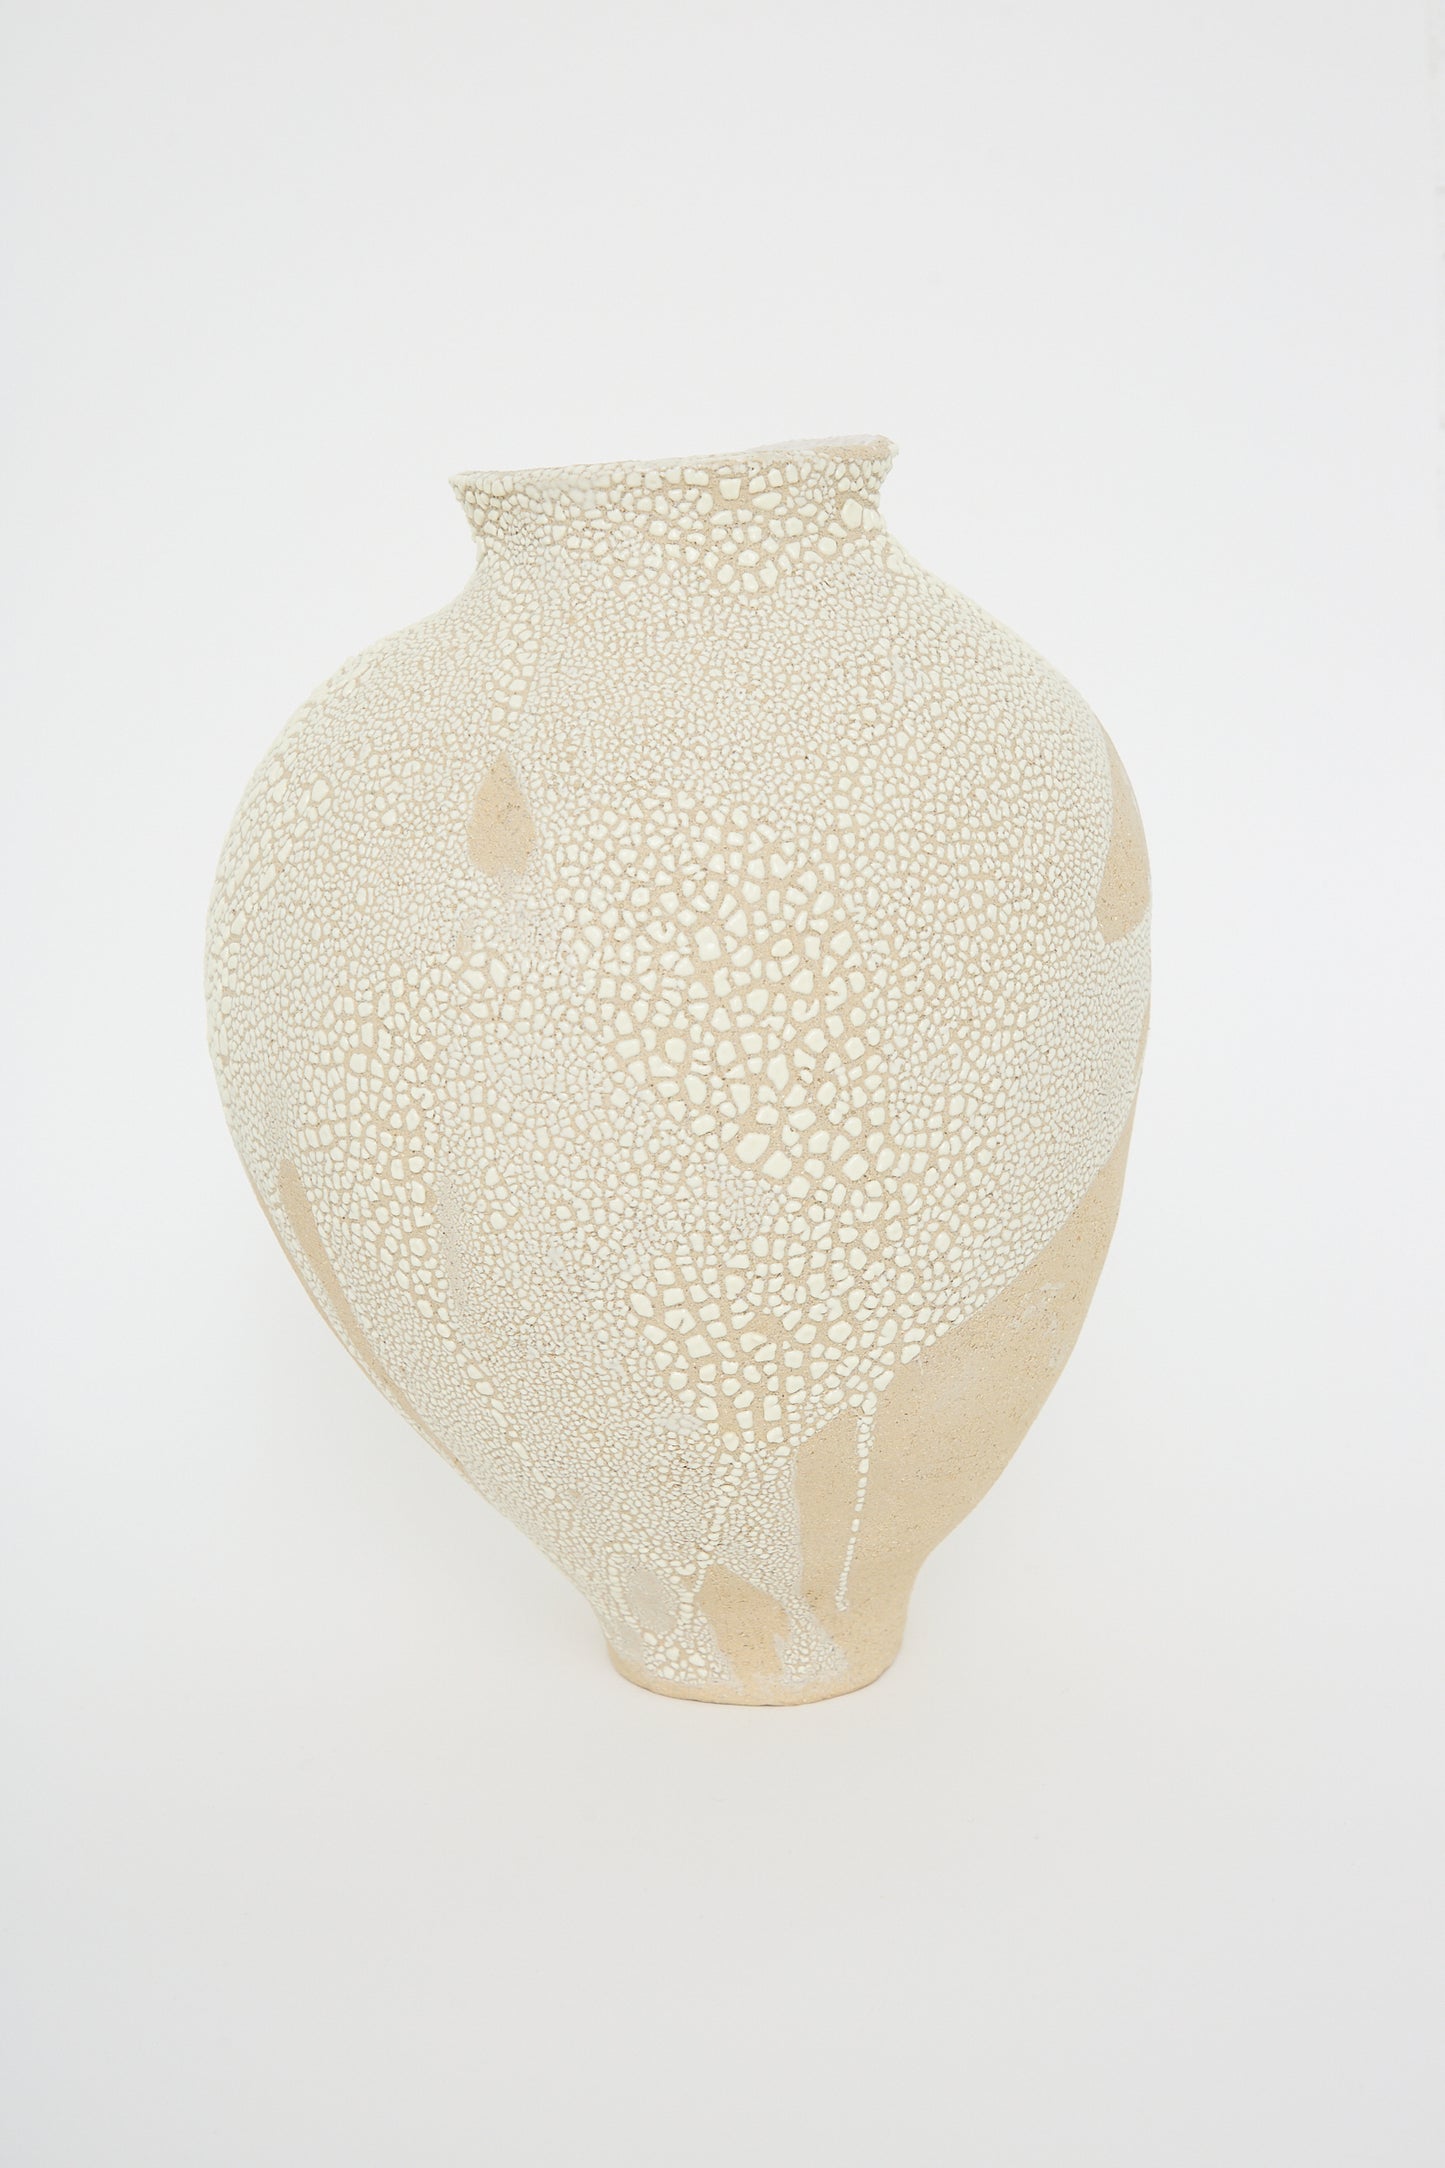 An intricately patterned Lost Quarry vessel No. 741 in White Sculpture Clay on a white background.